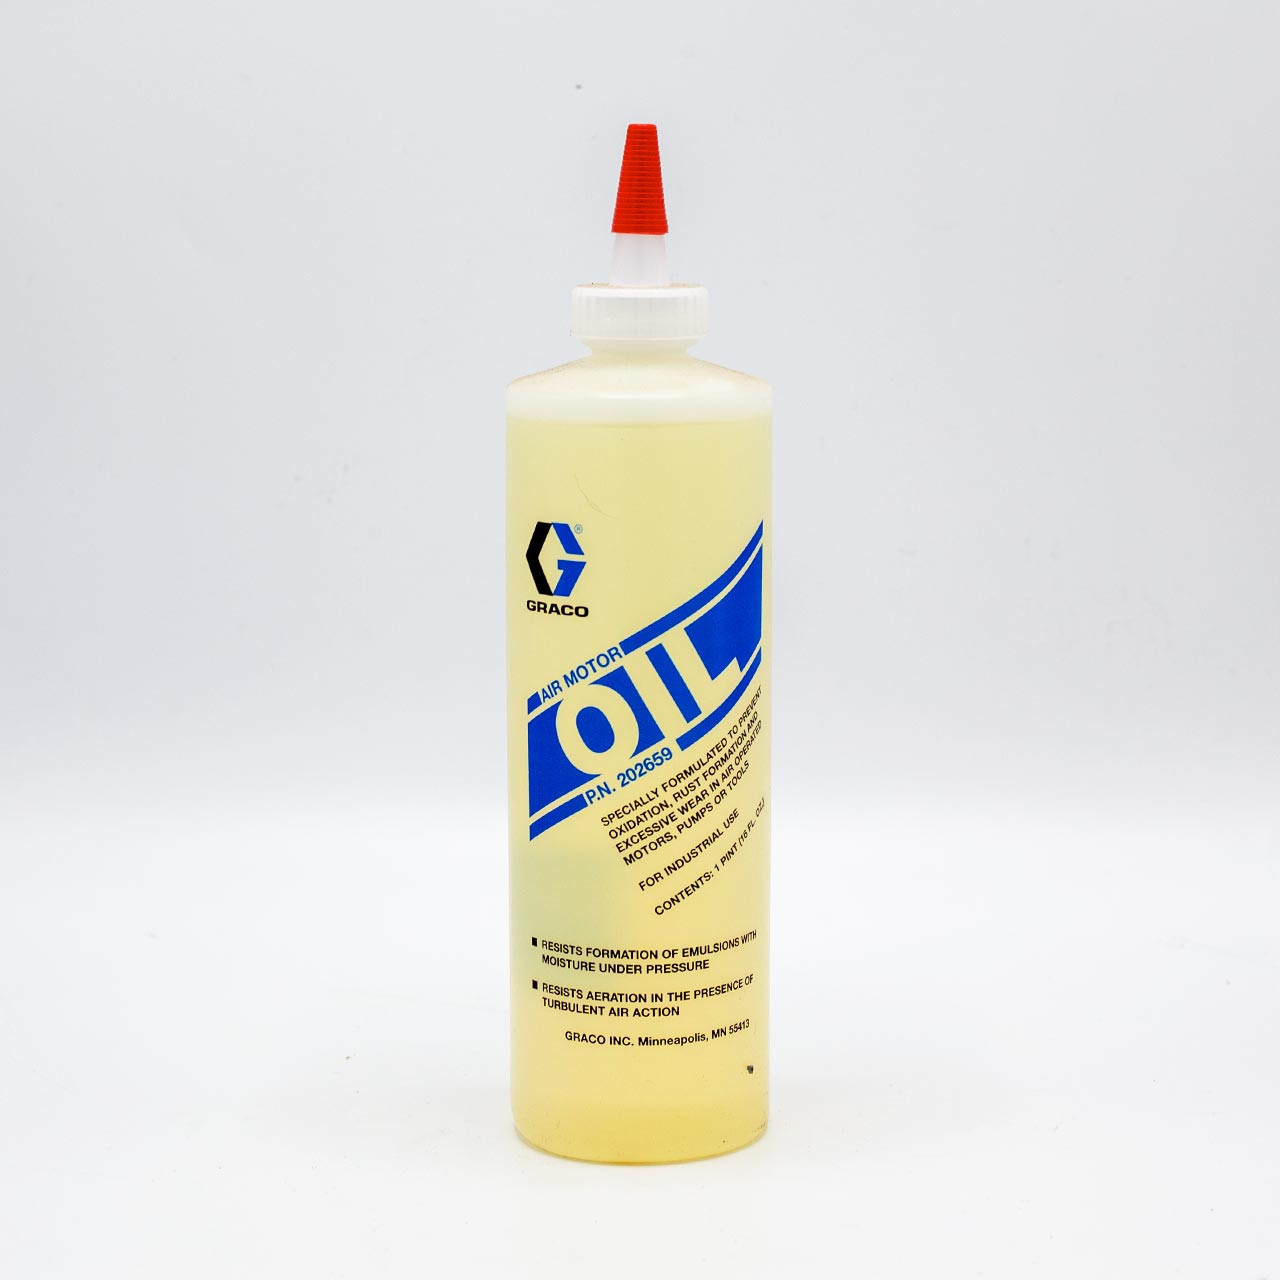 Cleaners & Lubricants